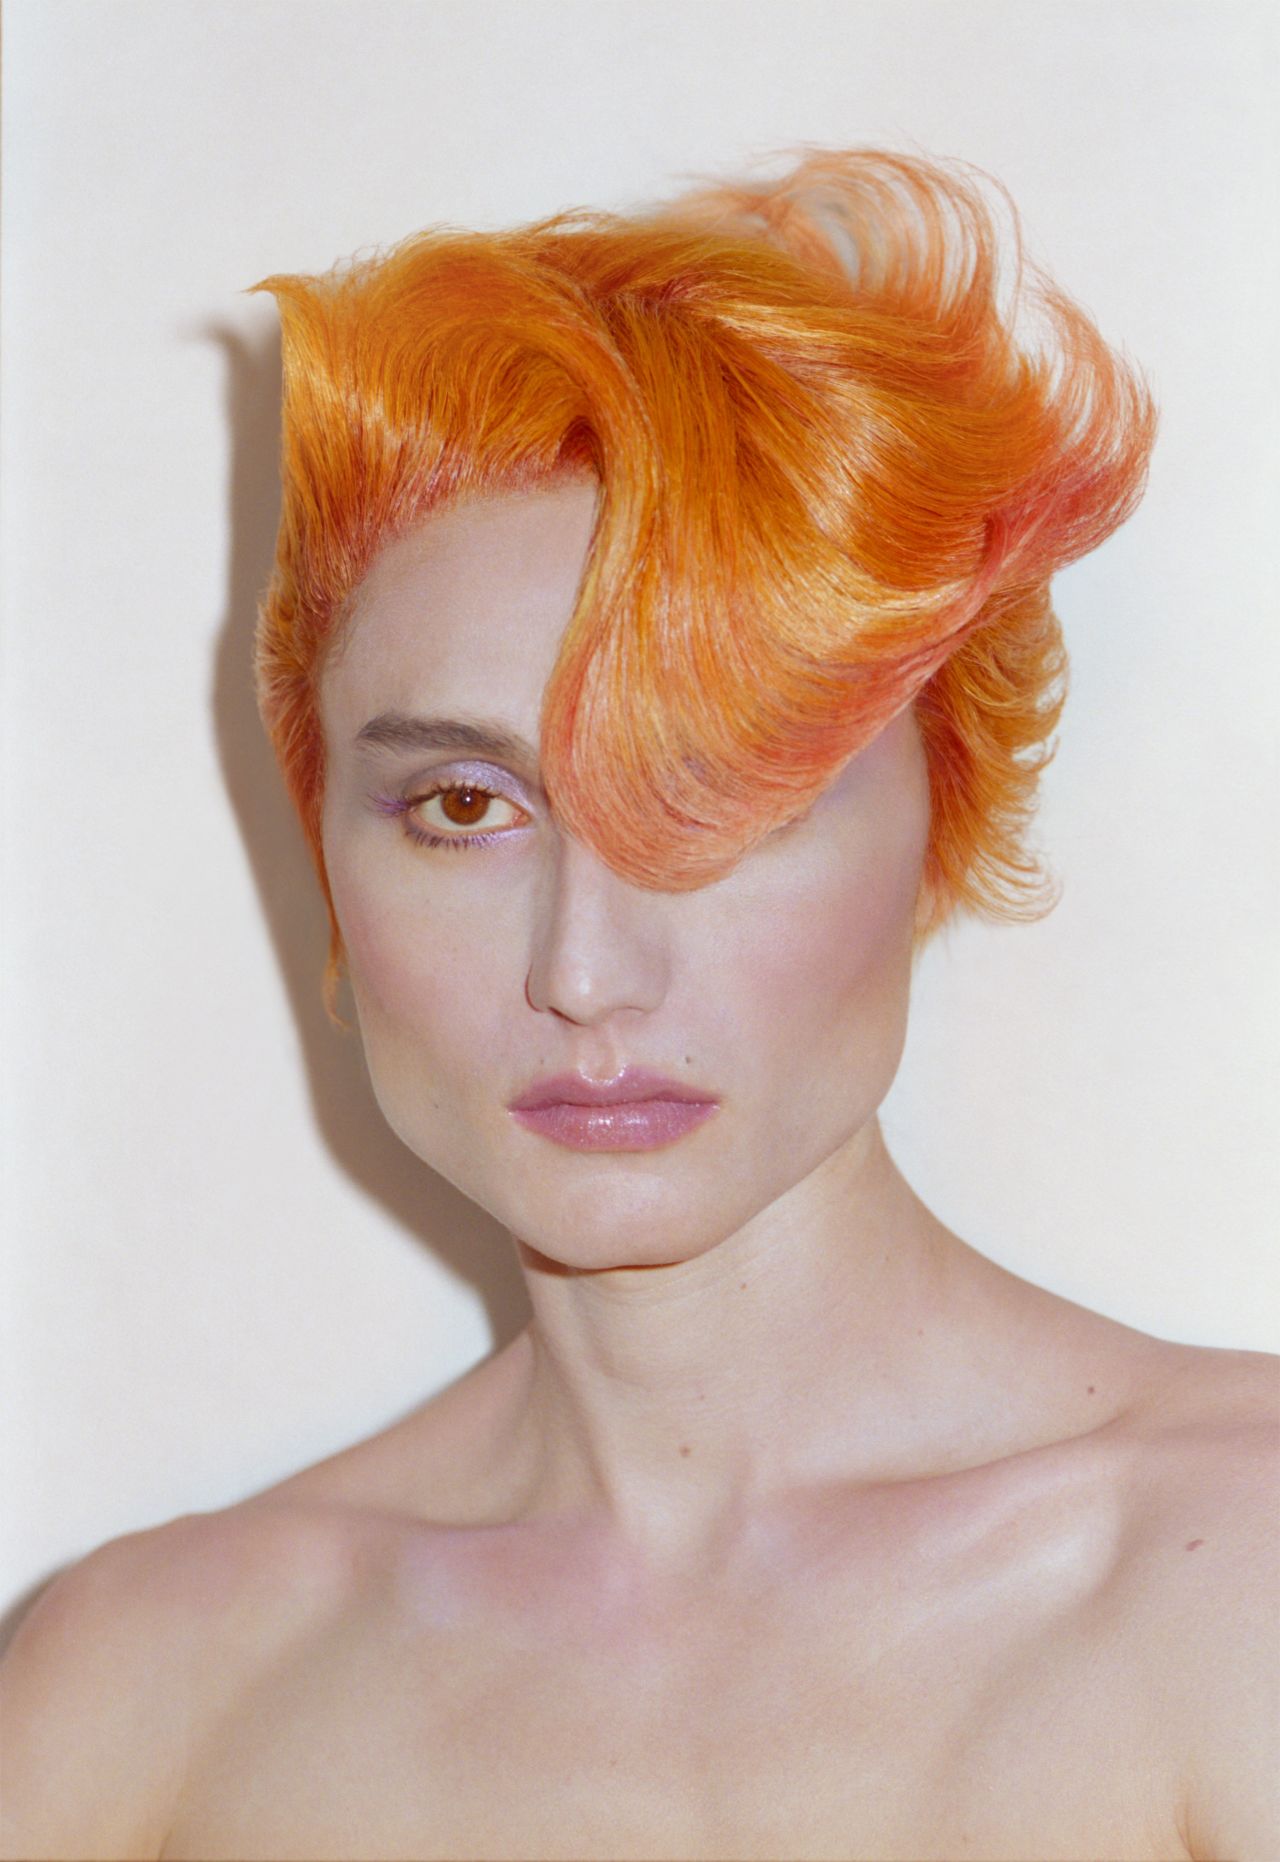 Wigmaker and hairstylist Tomihiro Kono's brightly colored creations play with ideas of identity and character. Modelled by Cameron Lee Phan.